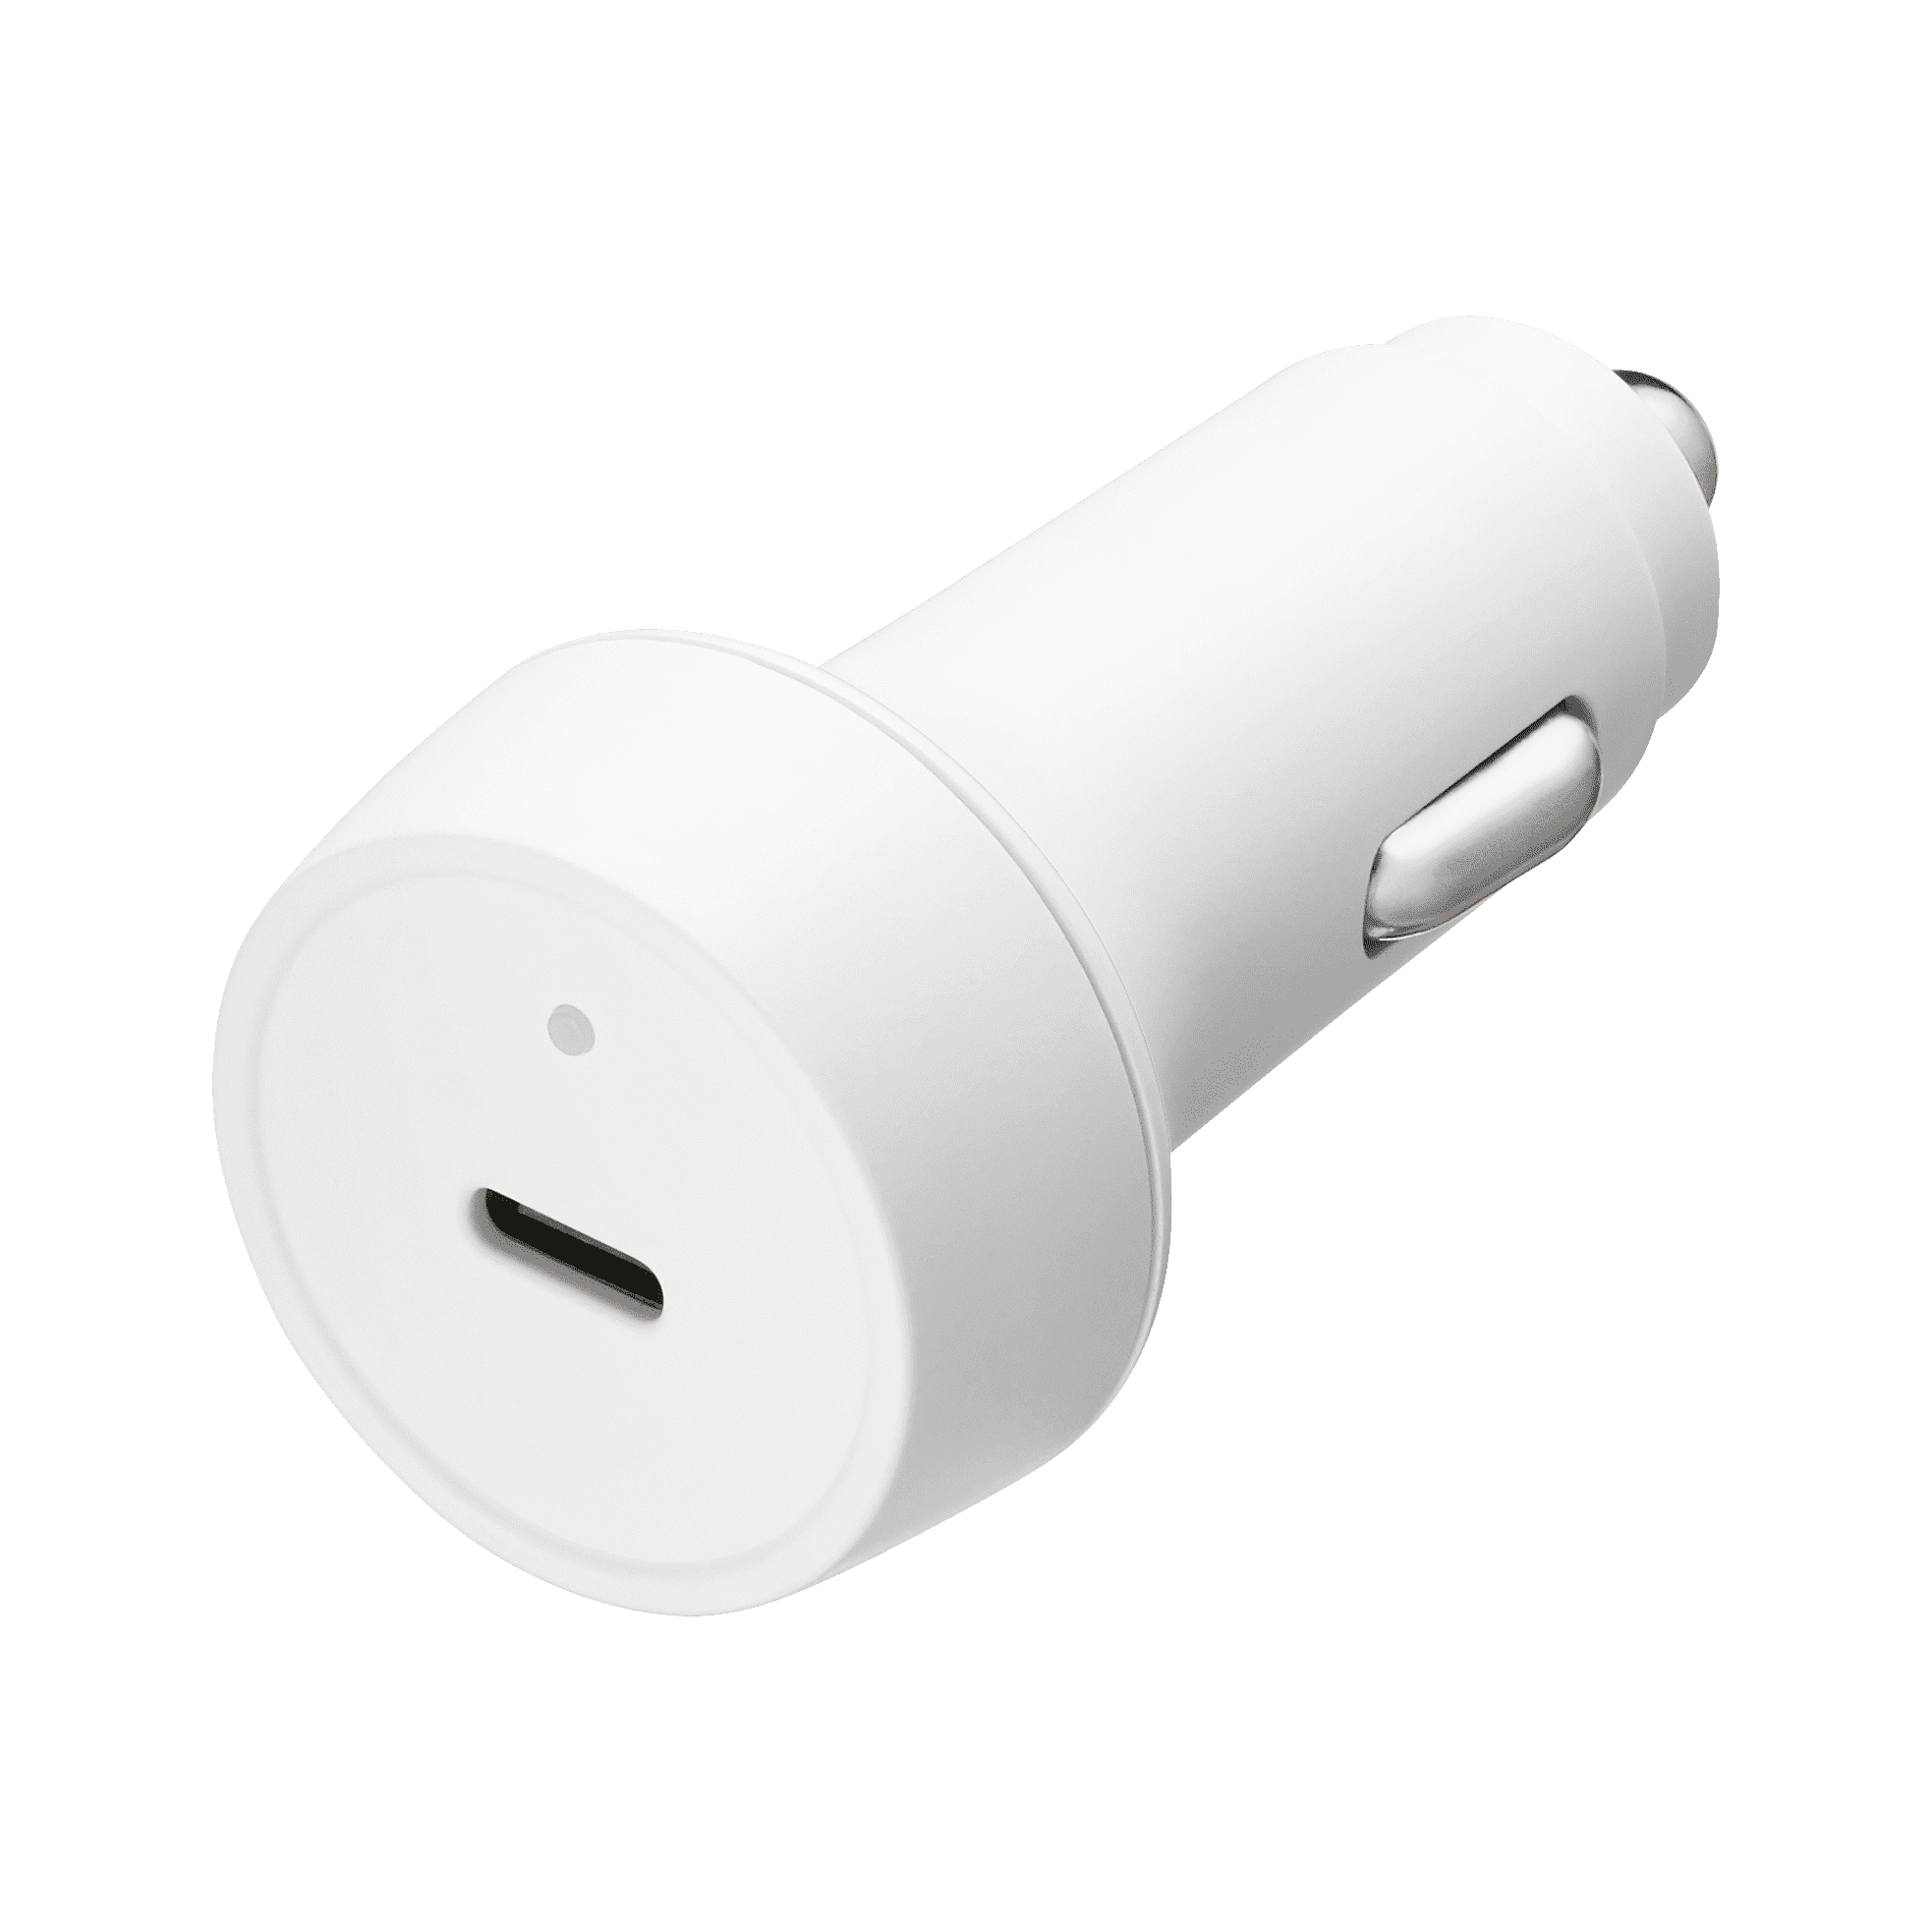 TPD-A18W Compact Car charger with LED Type-C 18W power delivery